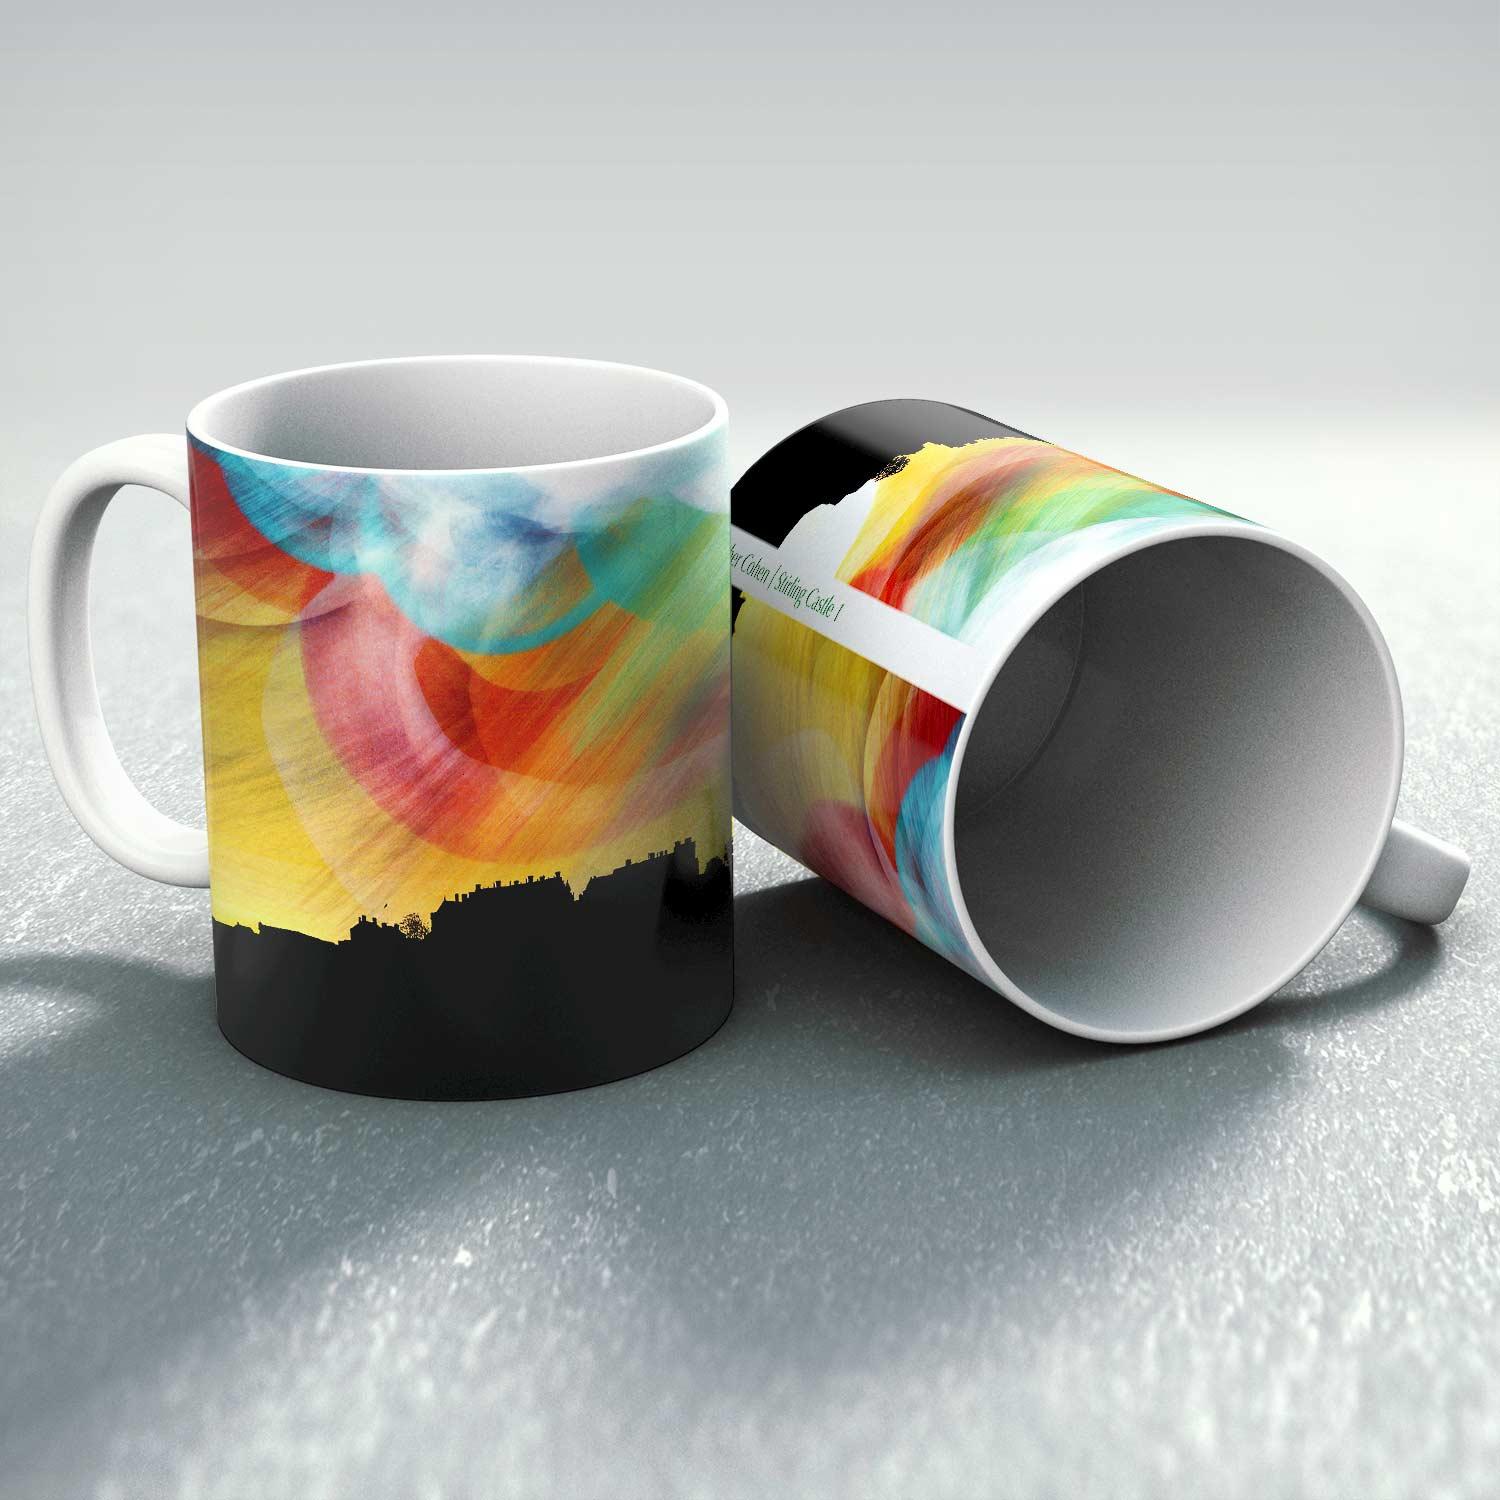 Stirling Castle 1 Mug from an original painting by artist Esther Cohen